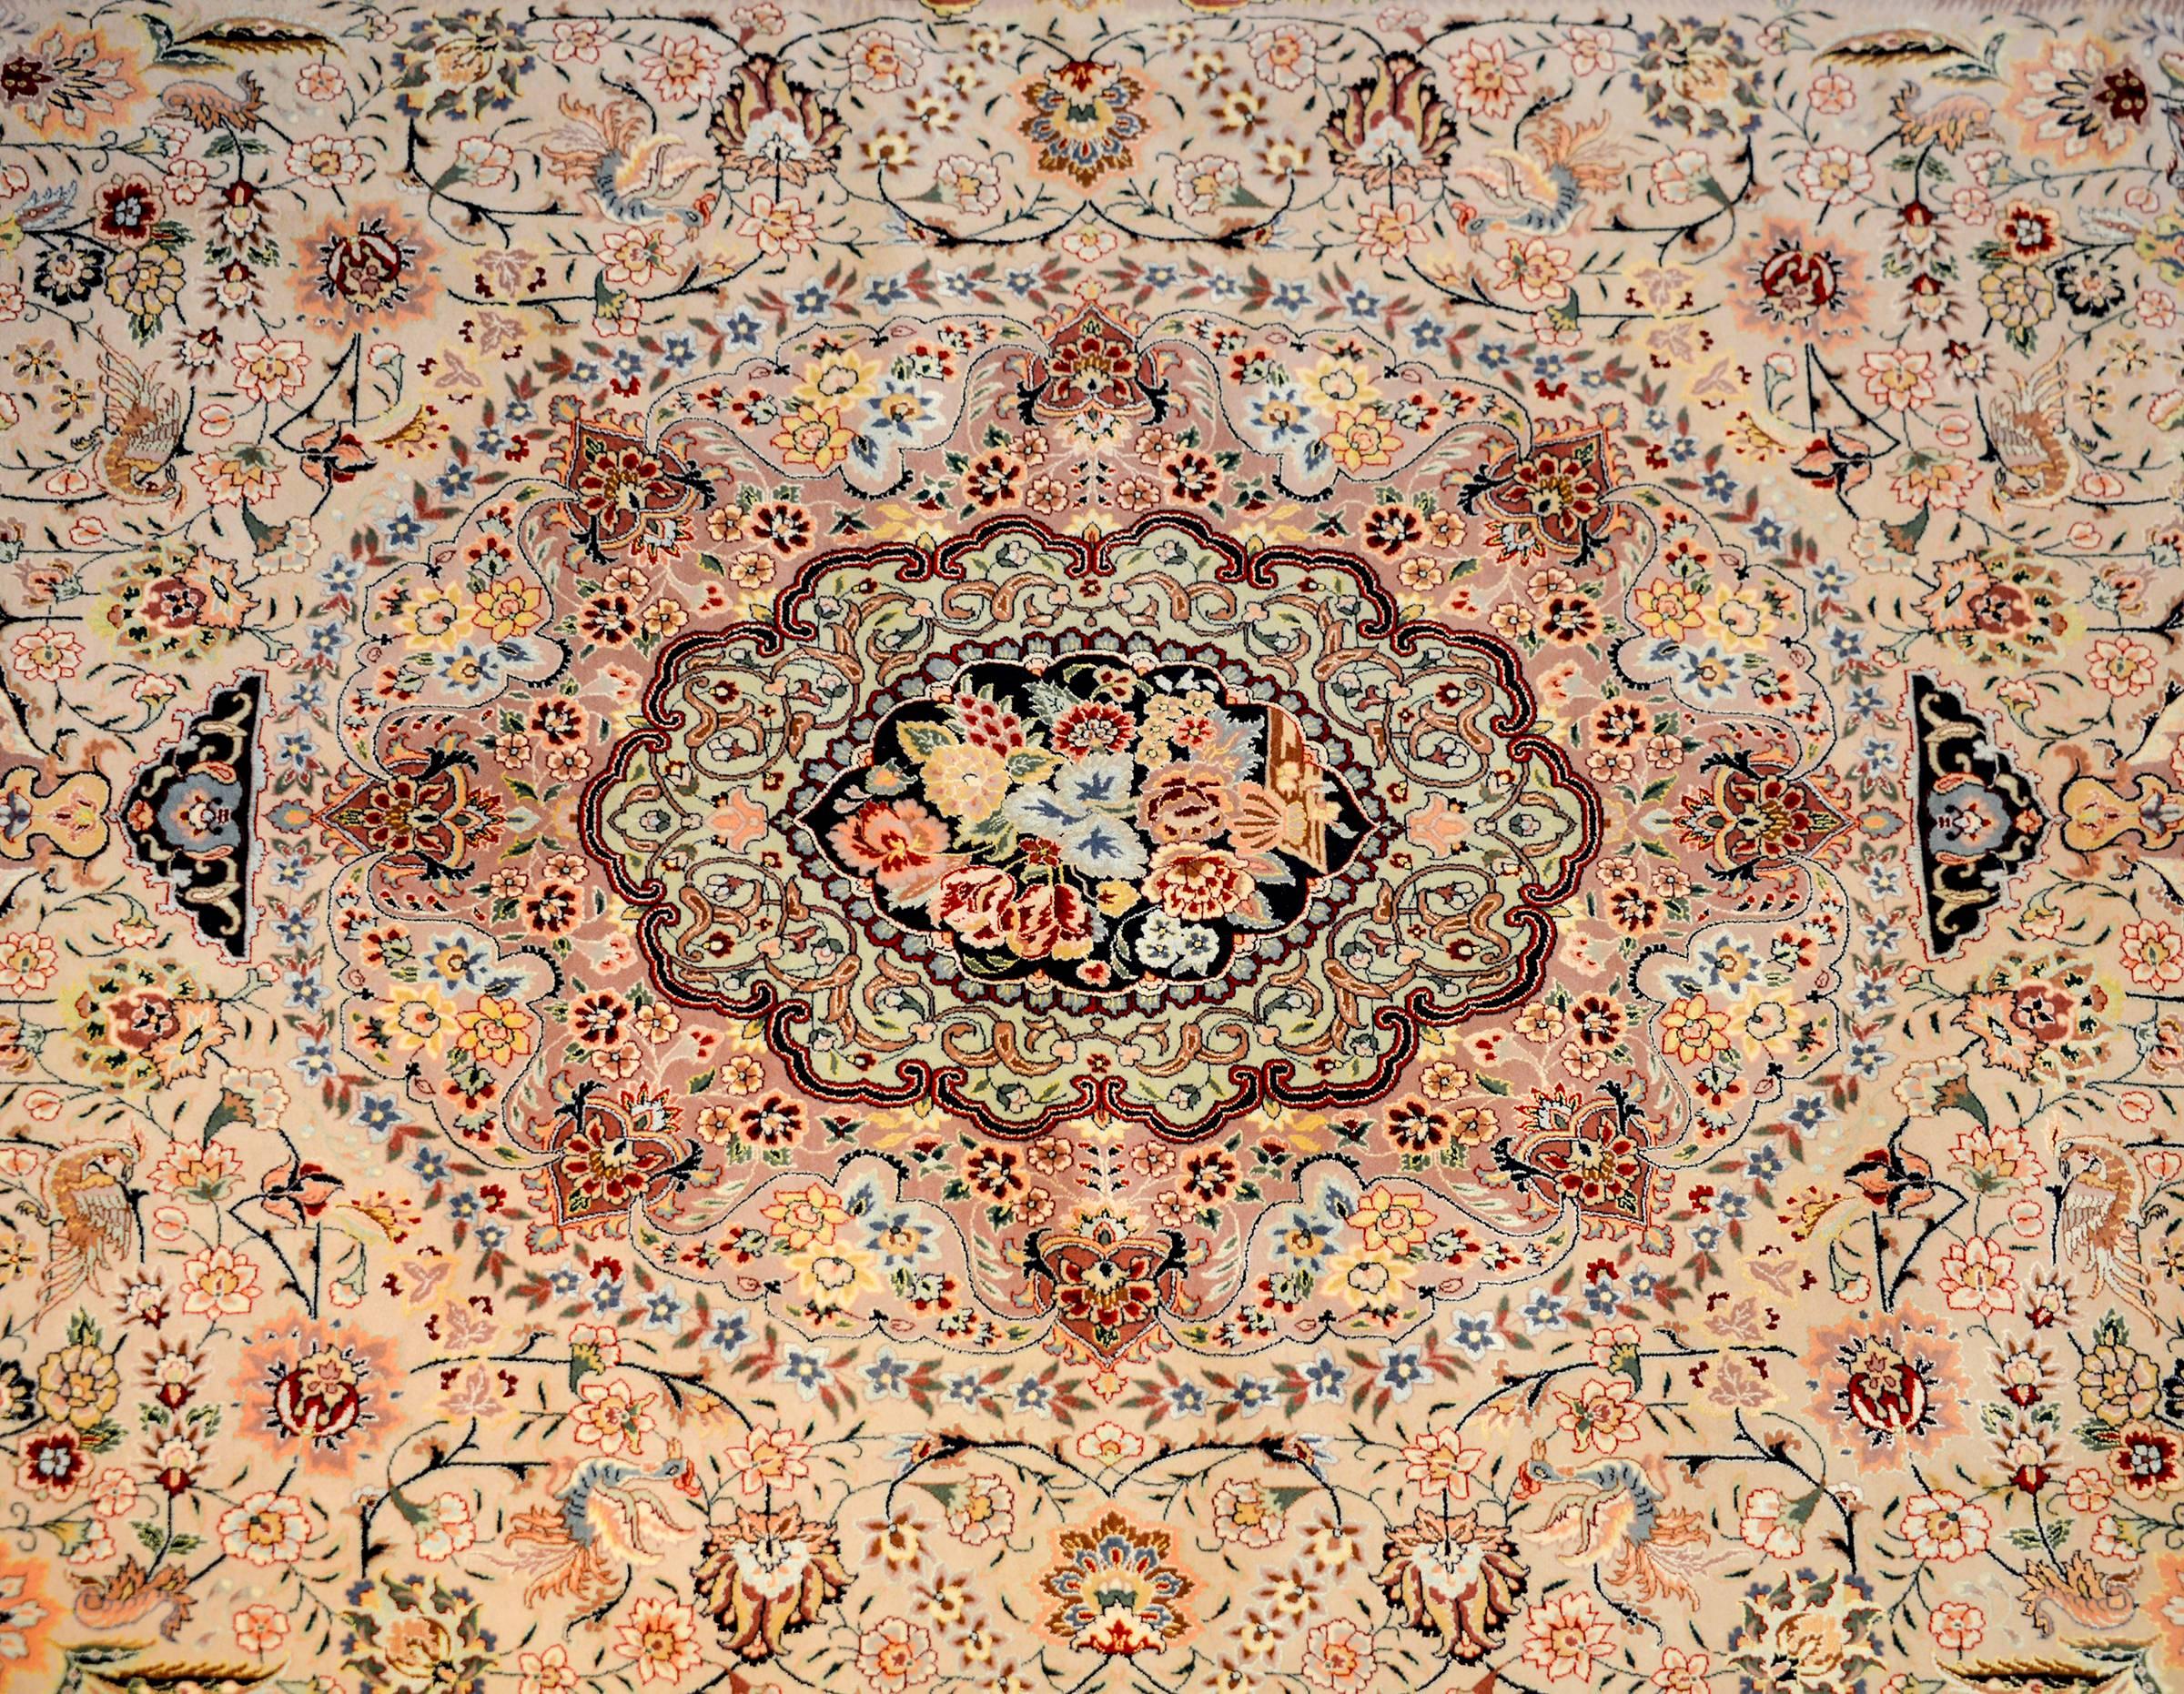 A wonderful vintage, Persian Tabriz rug with a mesmerizing pattern of intricately and tightly woven pattern of multicolored flowers and scrolling vines woven in vegetable dyed silk and wool. The border is complex with a large central field of